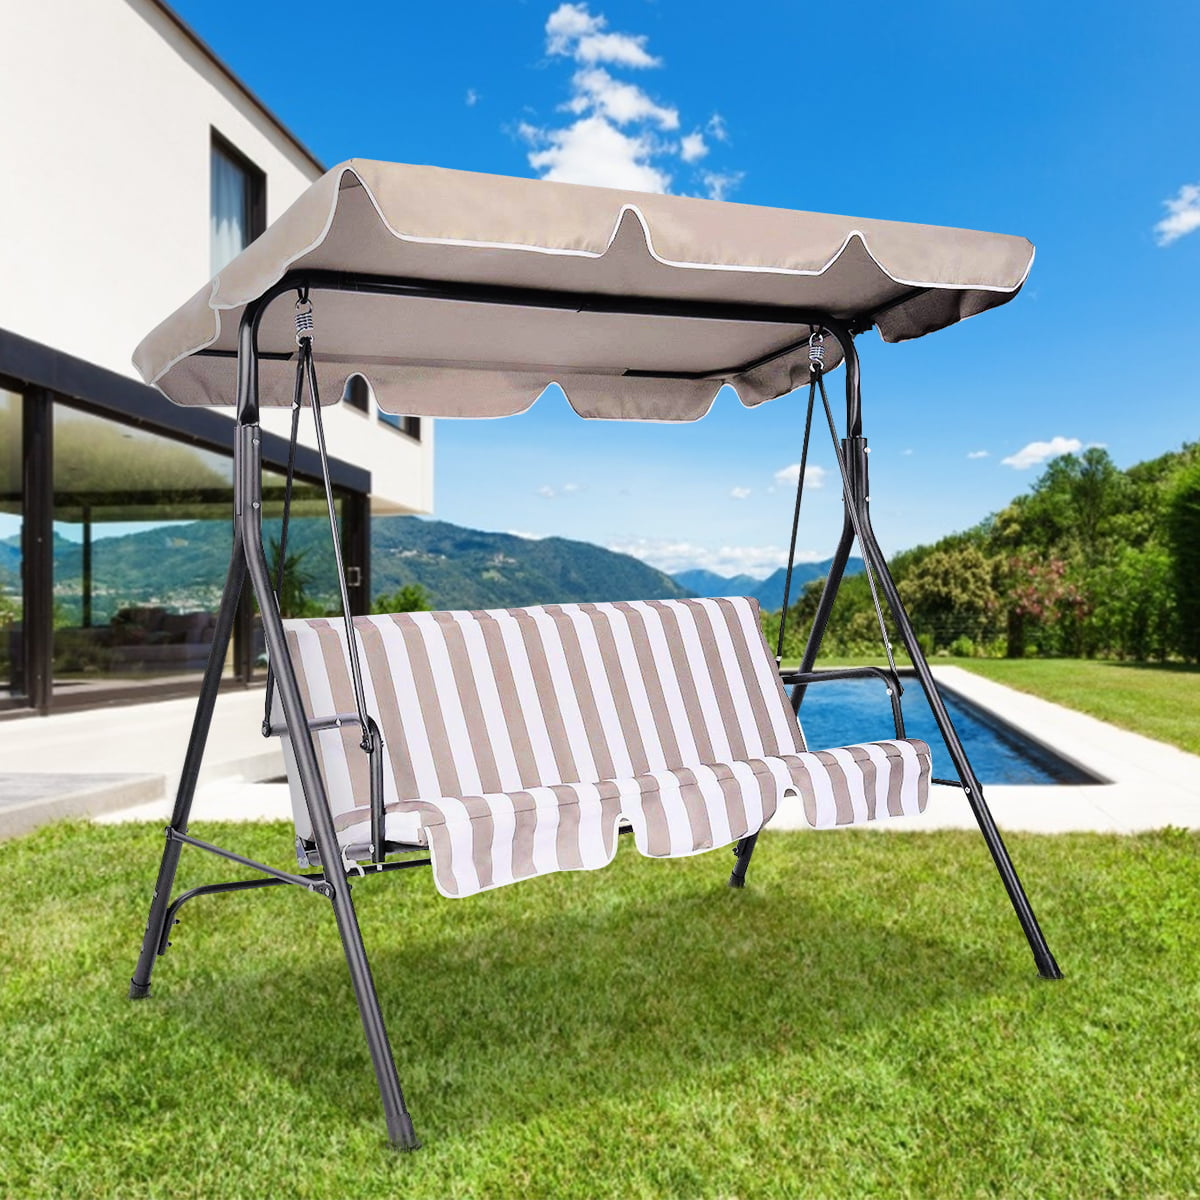 Details about   Patio Outdoor Garden Swing 300D Canopy Replacement Porch Top Cover Seat 75"x52" 